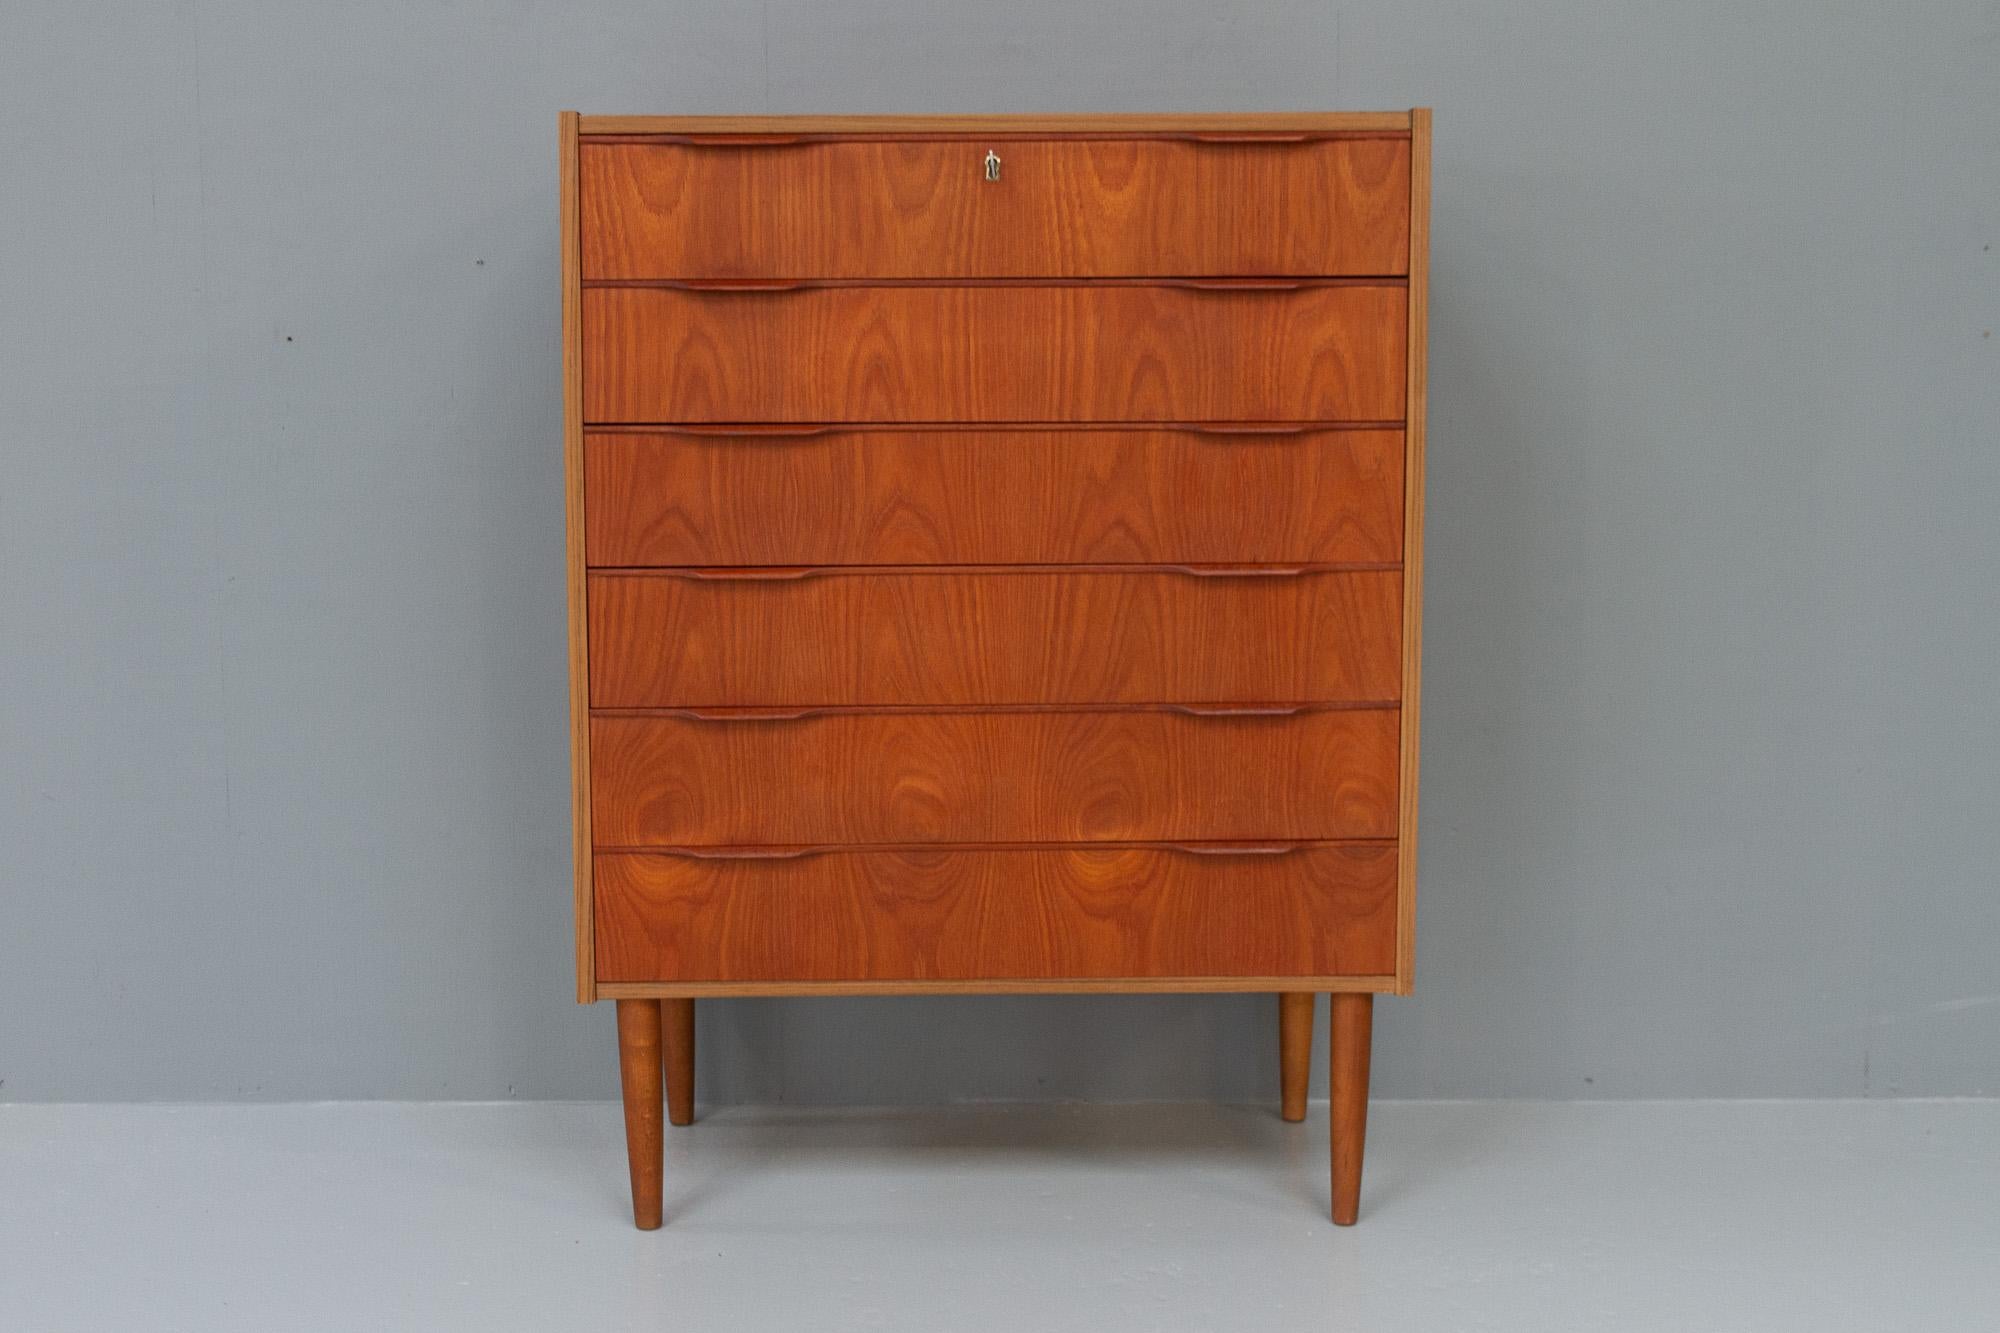 Vintage Danish Teak dresser, 1960s.
Danish Modern chest of drawers in veneered teak. Round tapered legs in stained solid beech. Six drawers with sculpted pulls in solid teak. Top drawer with a lock, key is included.
Made in Denmark in the